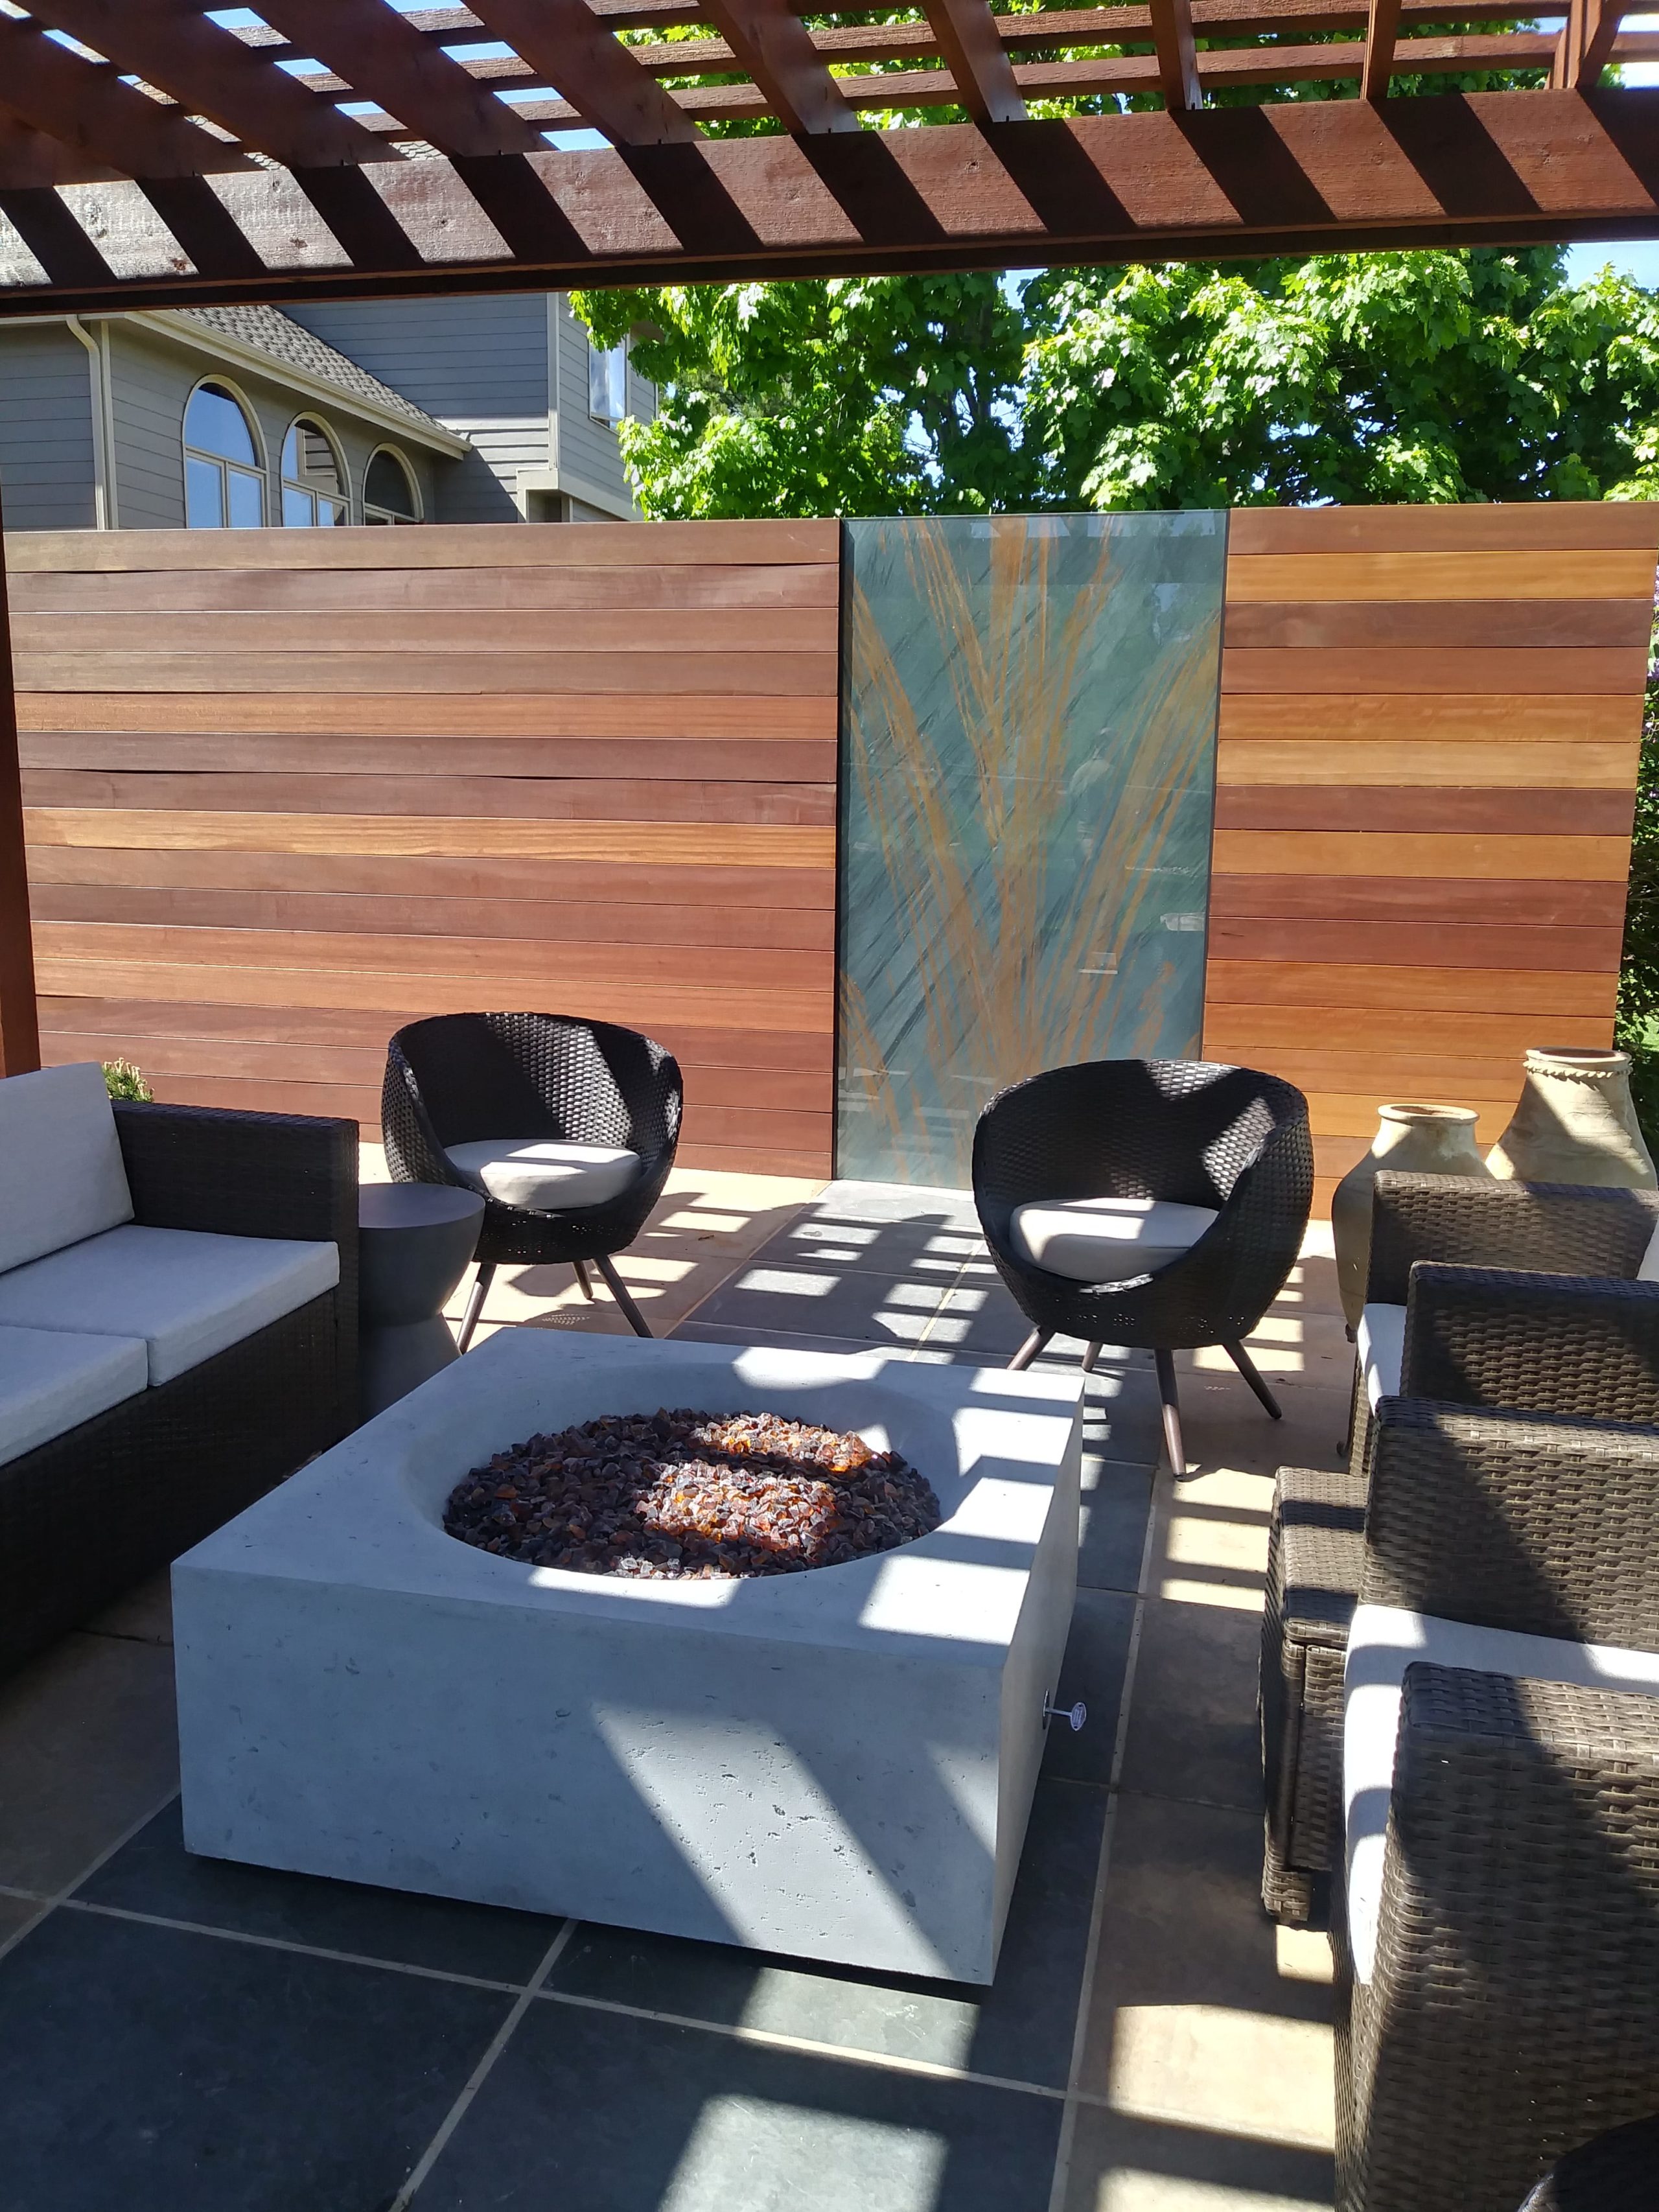 Large pergola over top of a tile patio with seating area around a concrete bowl fire pit.